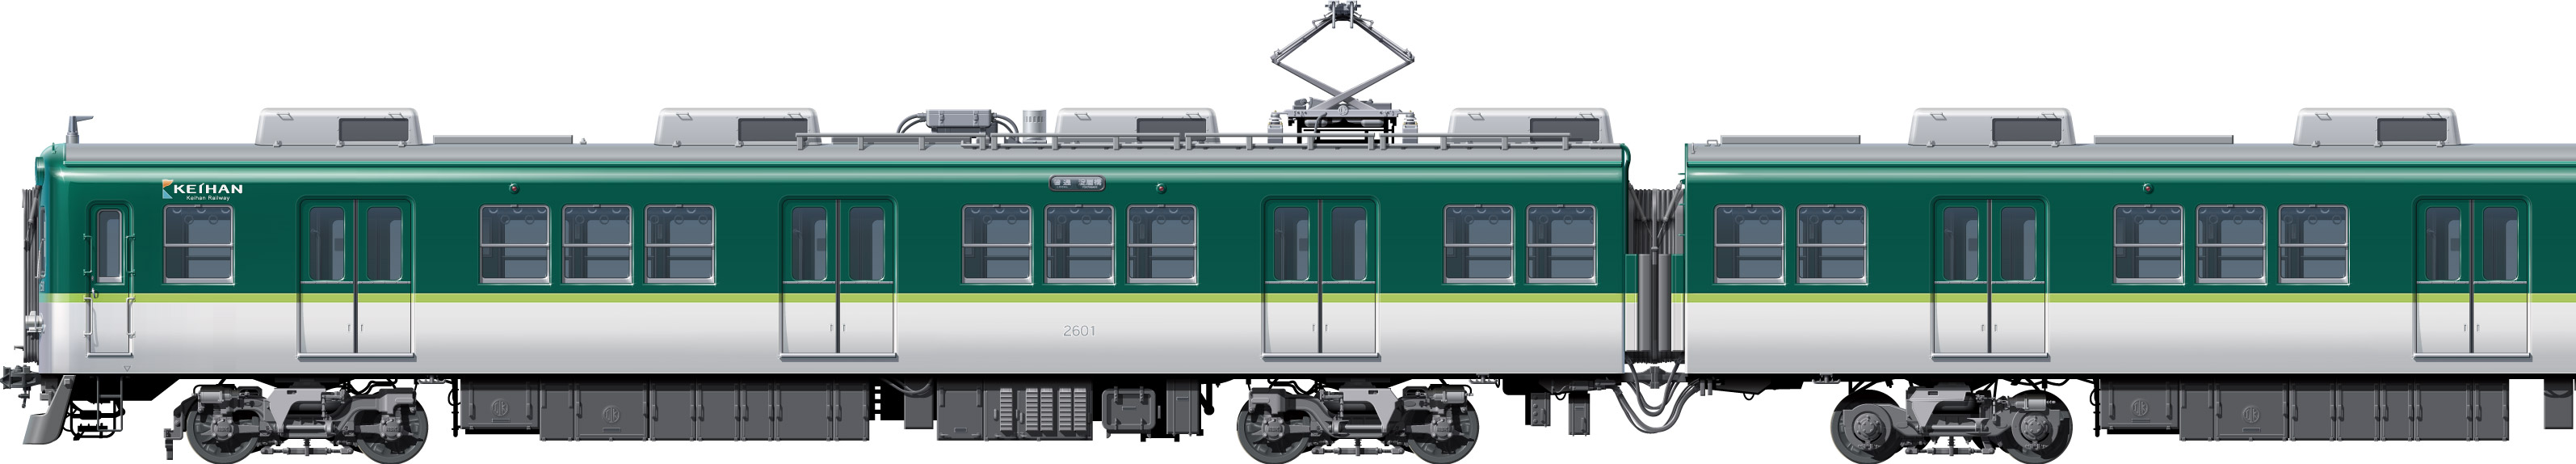 2600n@ʃCXg@ʃCXg@tgr[CXg@TChr[CXg@CXg@dS@2000n@X[p[J[@keihan Railway illustration  front view@sideview front view